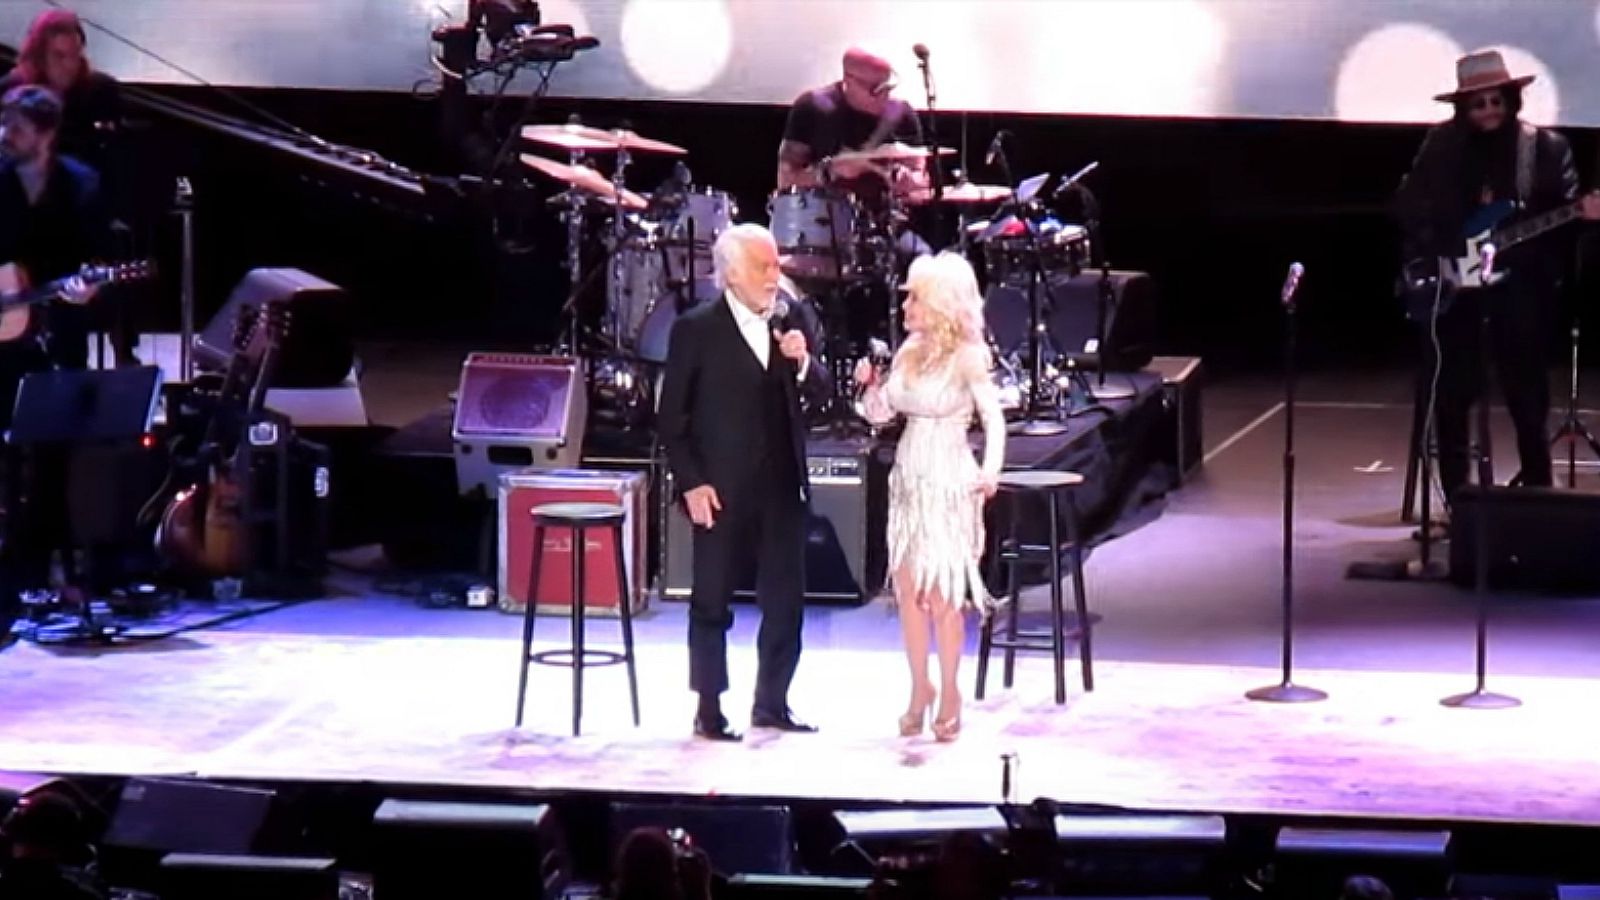 Kenny Rogers and Dolly Parton Perform an Emotional Final Duet.